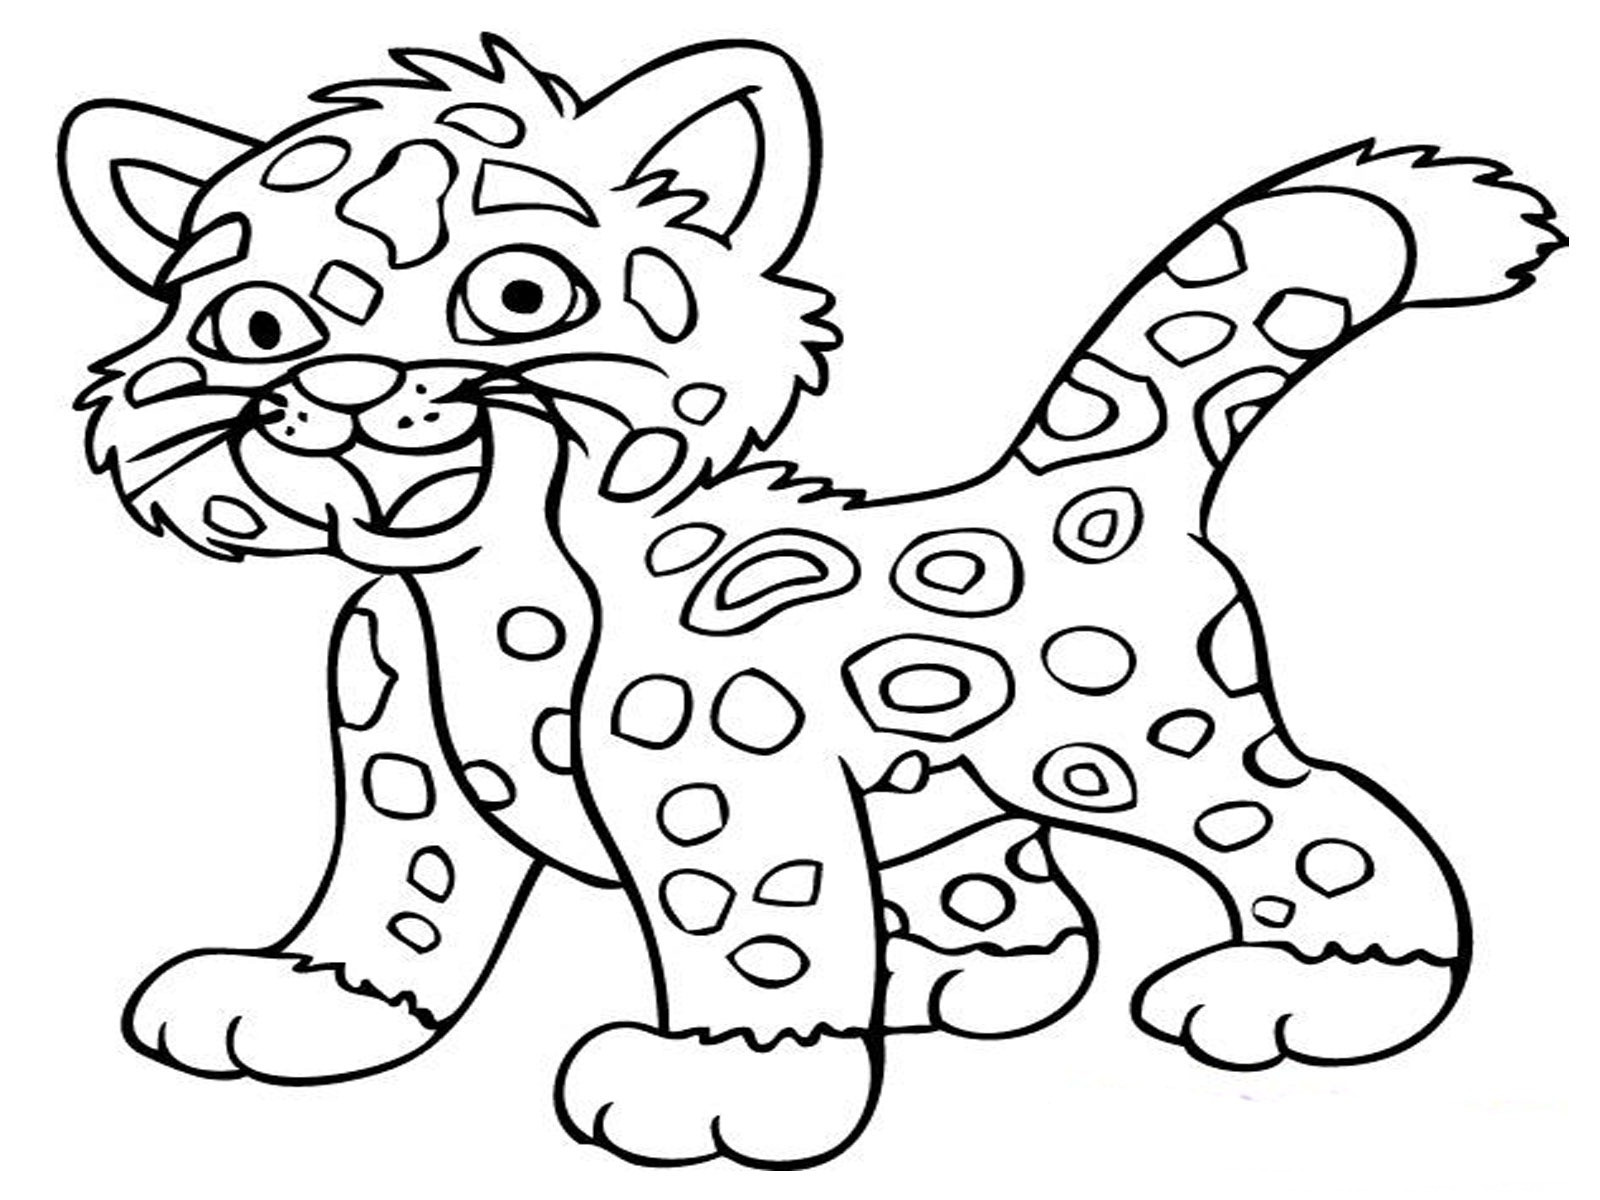 Printable Animal Coloring Pages For Kids
 Animal Coloring Pages 9